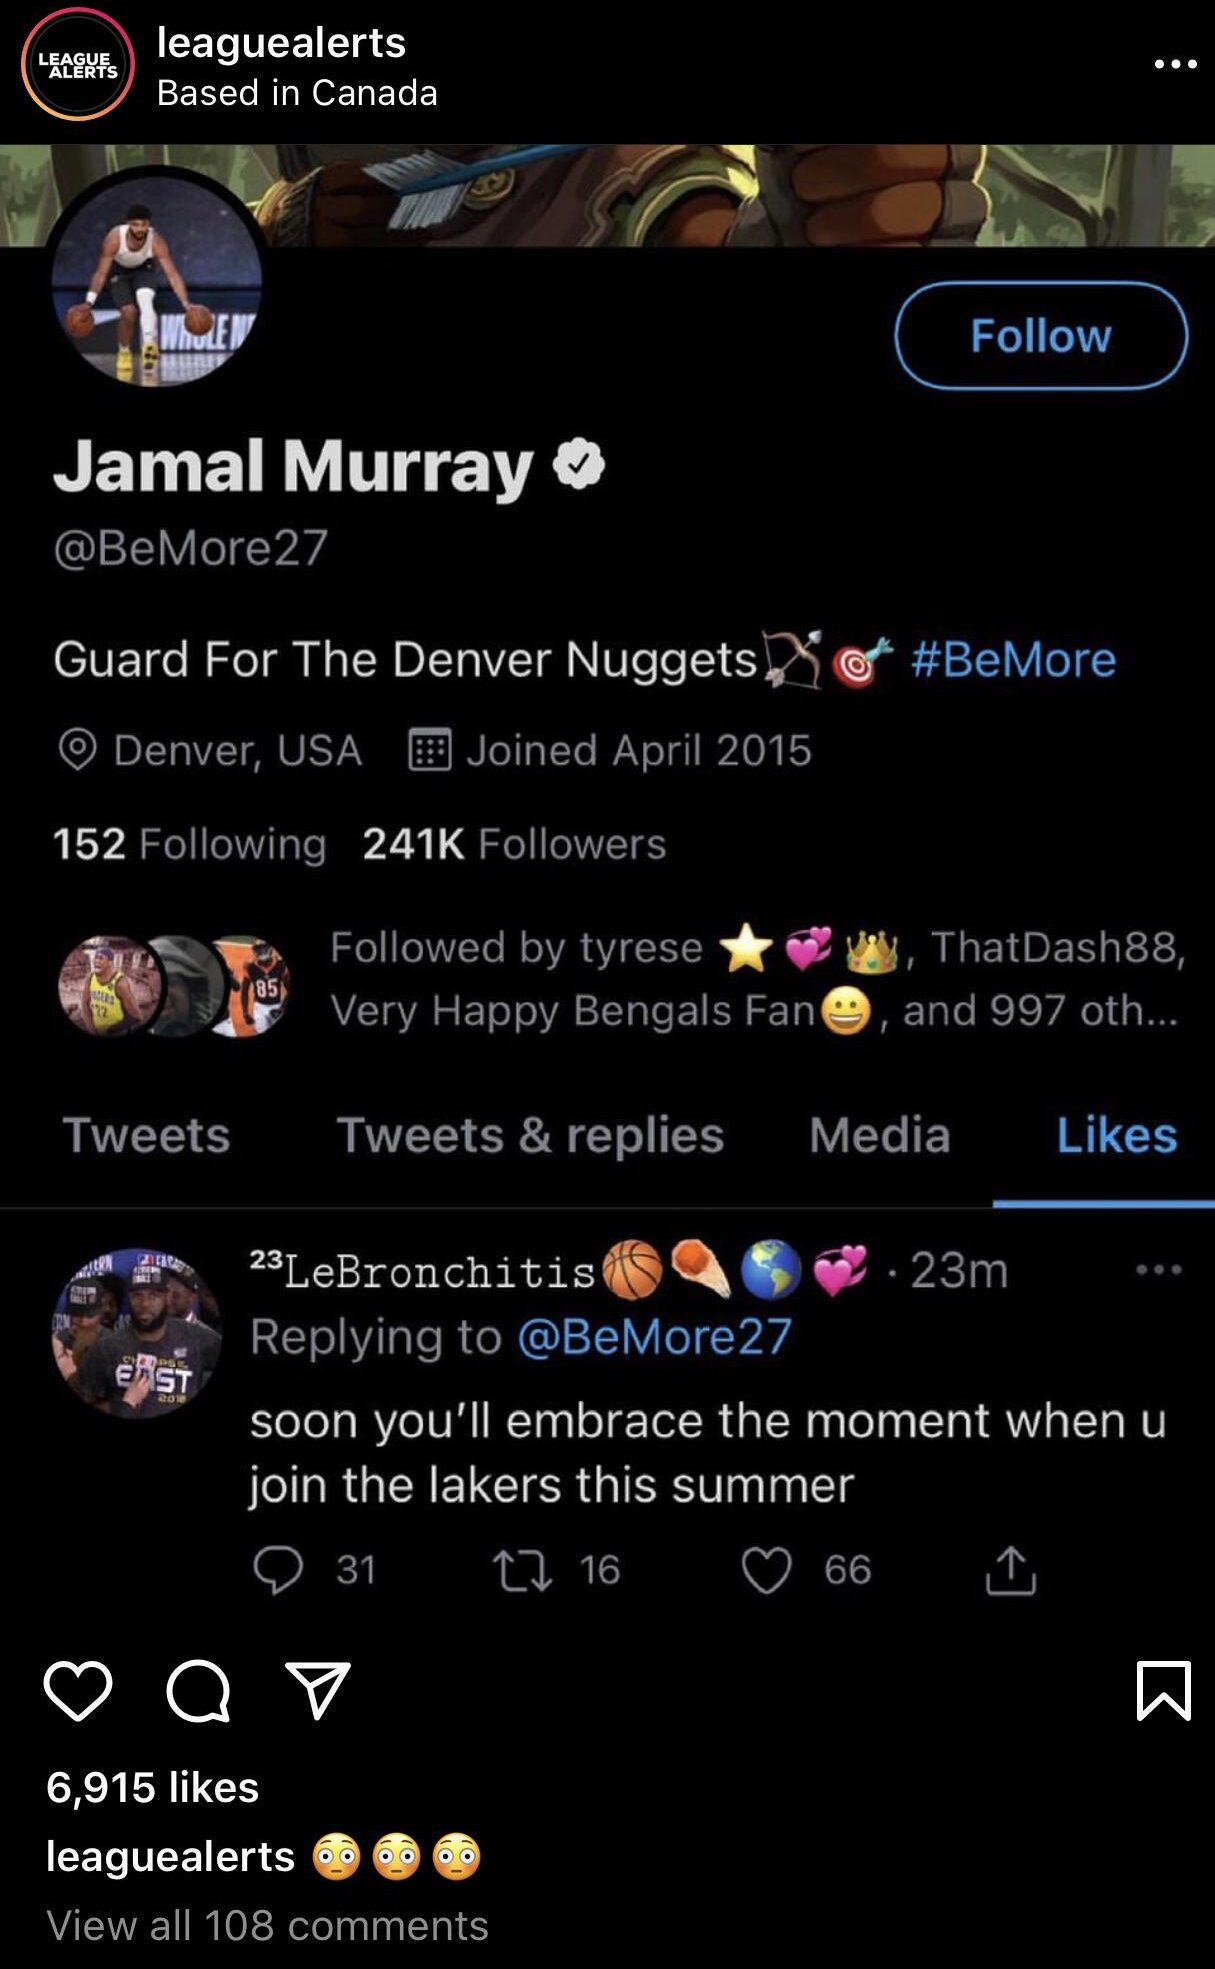 Jamal Murray and Los Angeles Lakers